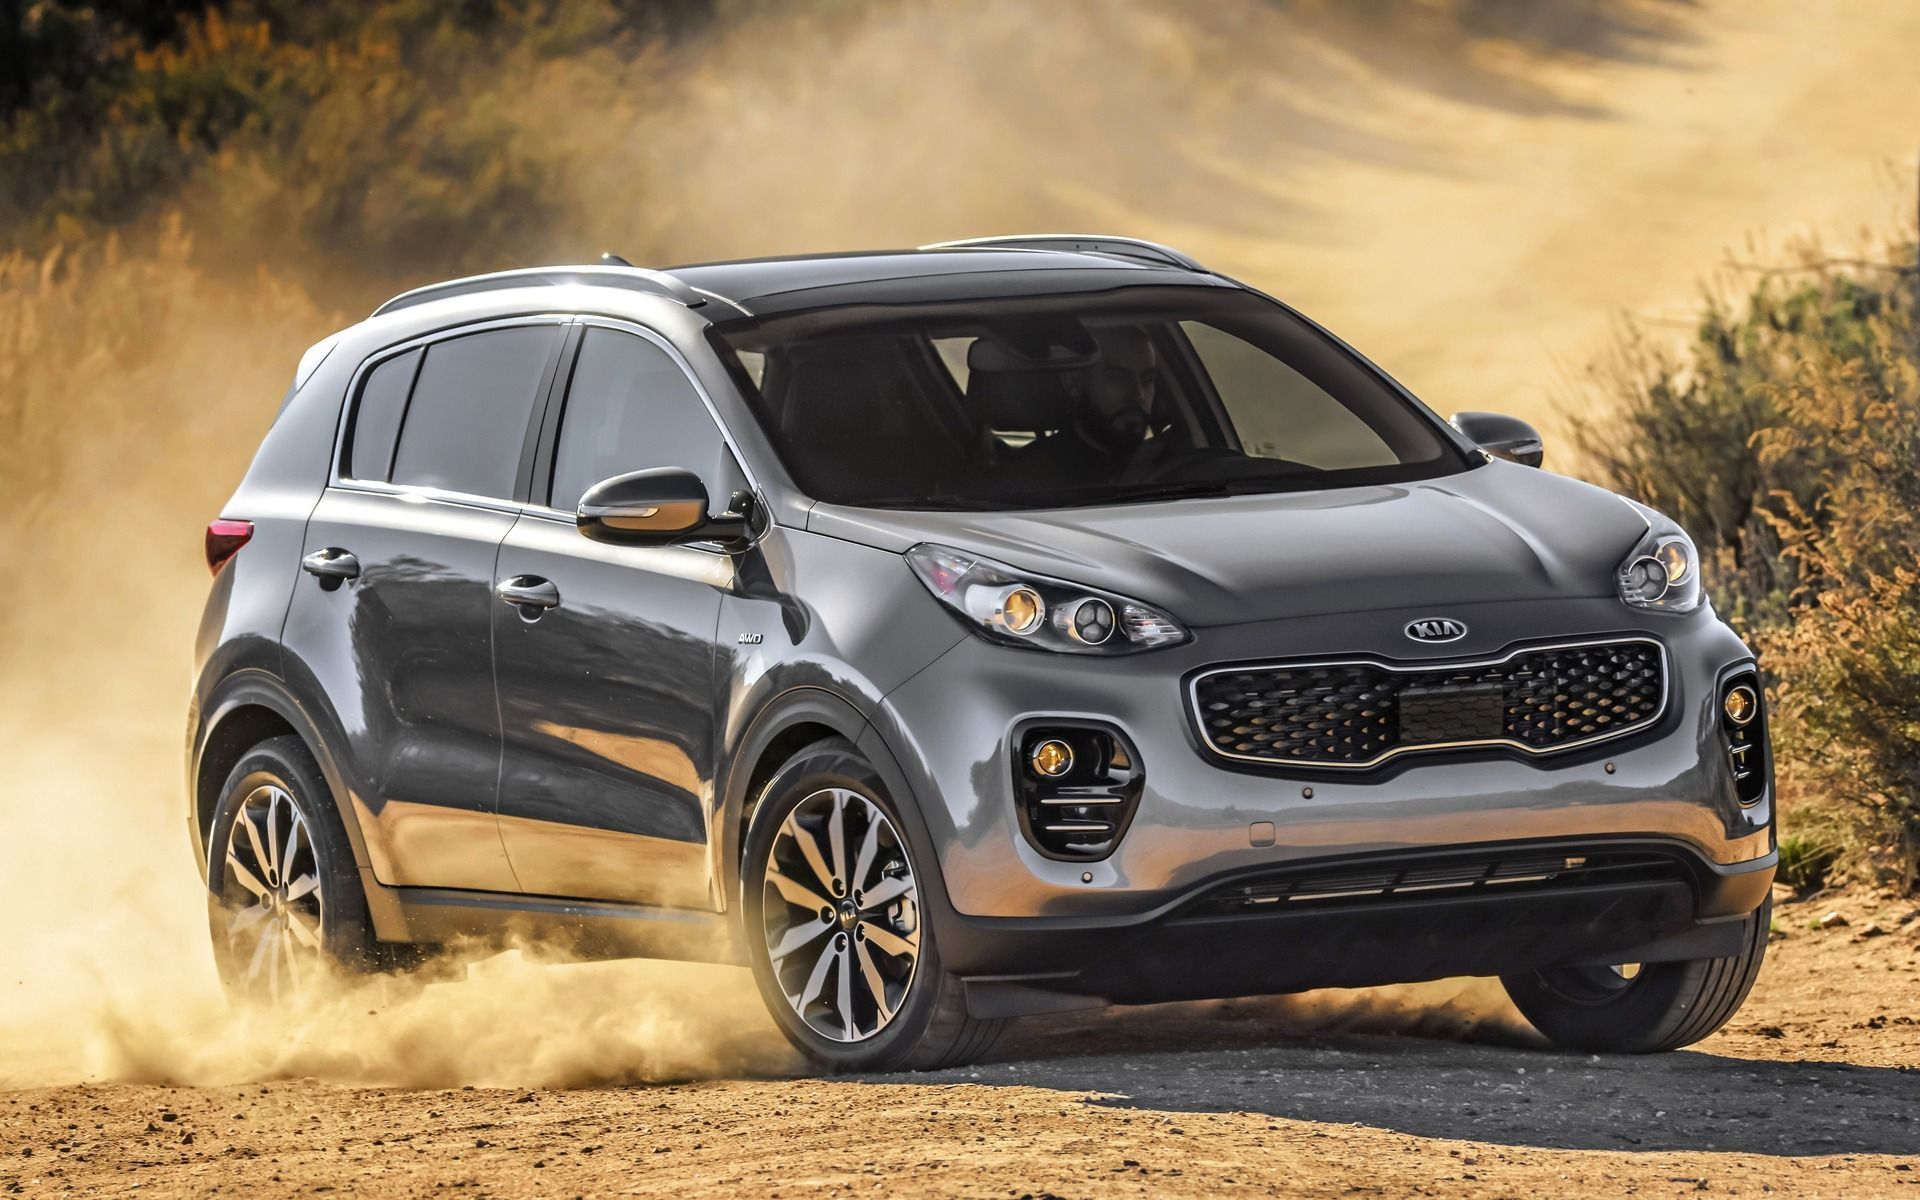 The advantages of the Kia Certified Pre-Owned Vehicle program